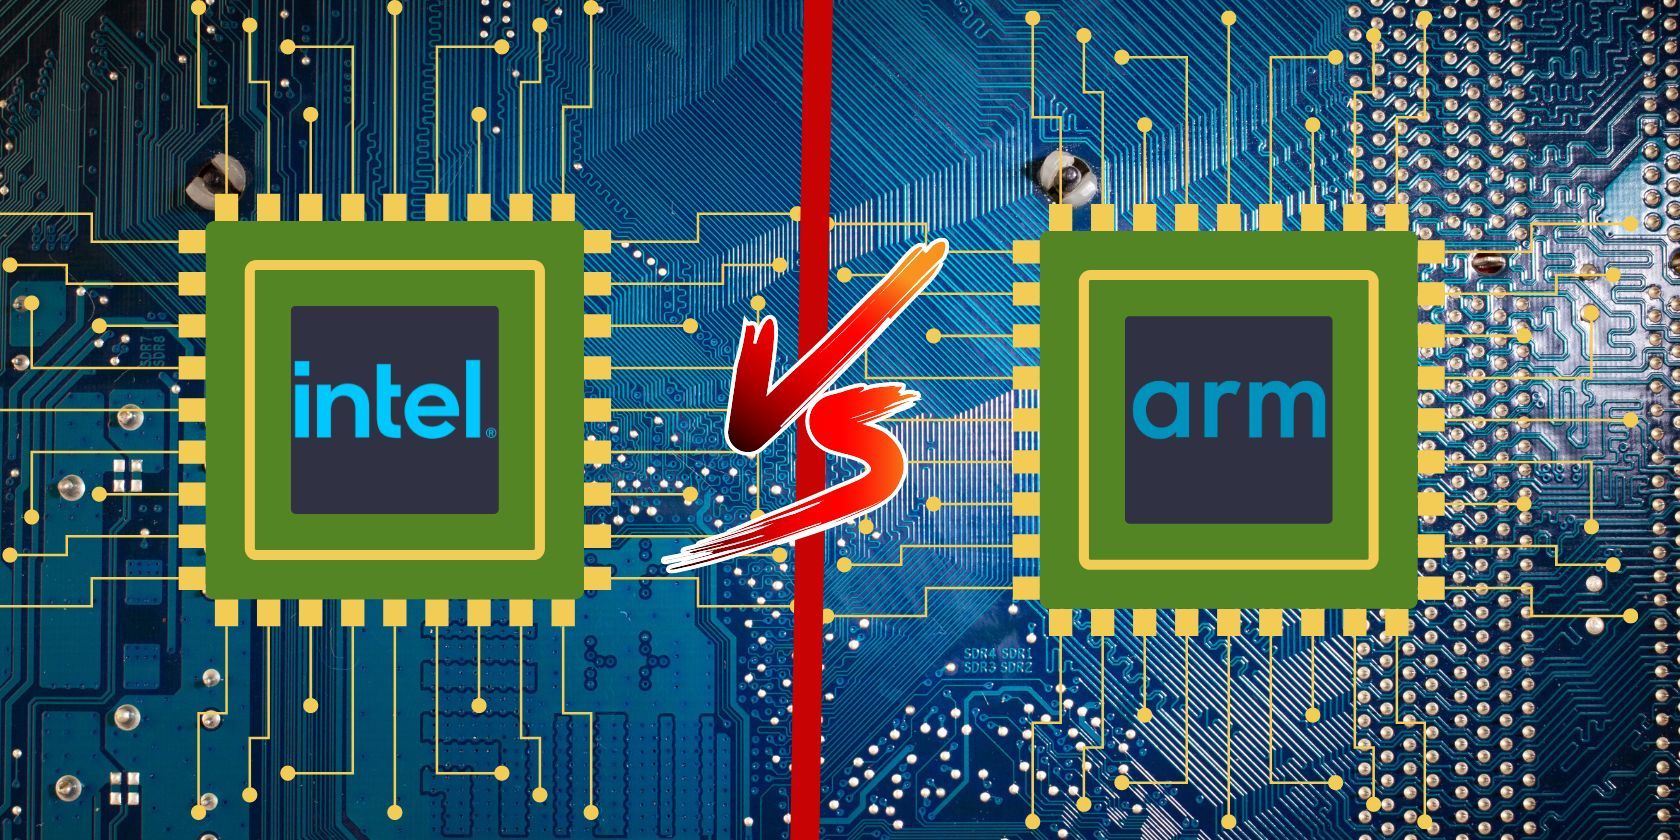  A comparison of the ARM and Intel CPUs with the text 'ARM' and 'Intel' written on each CPU.